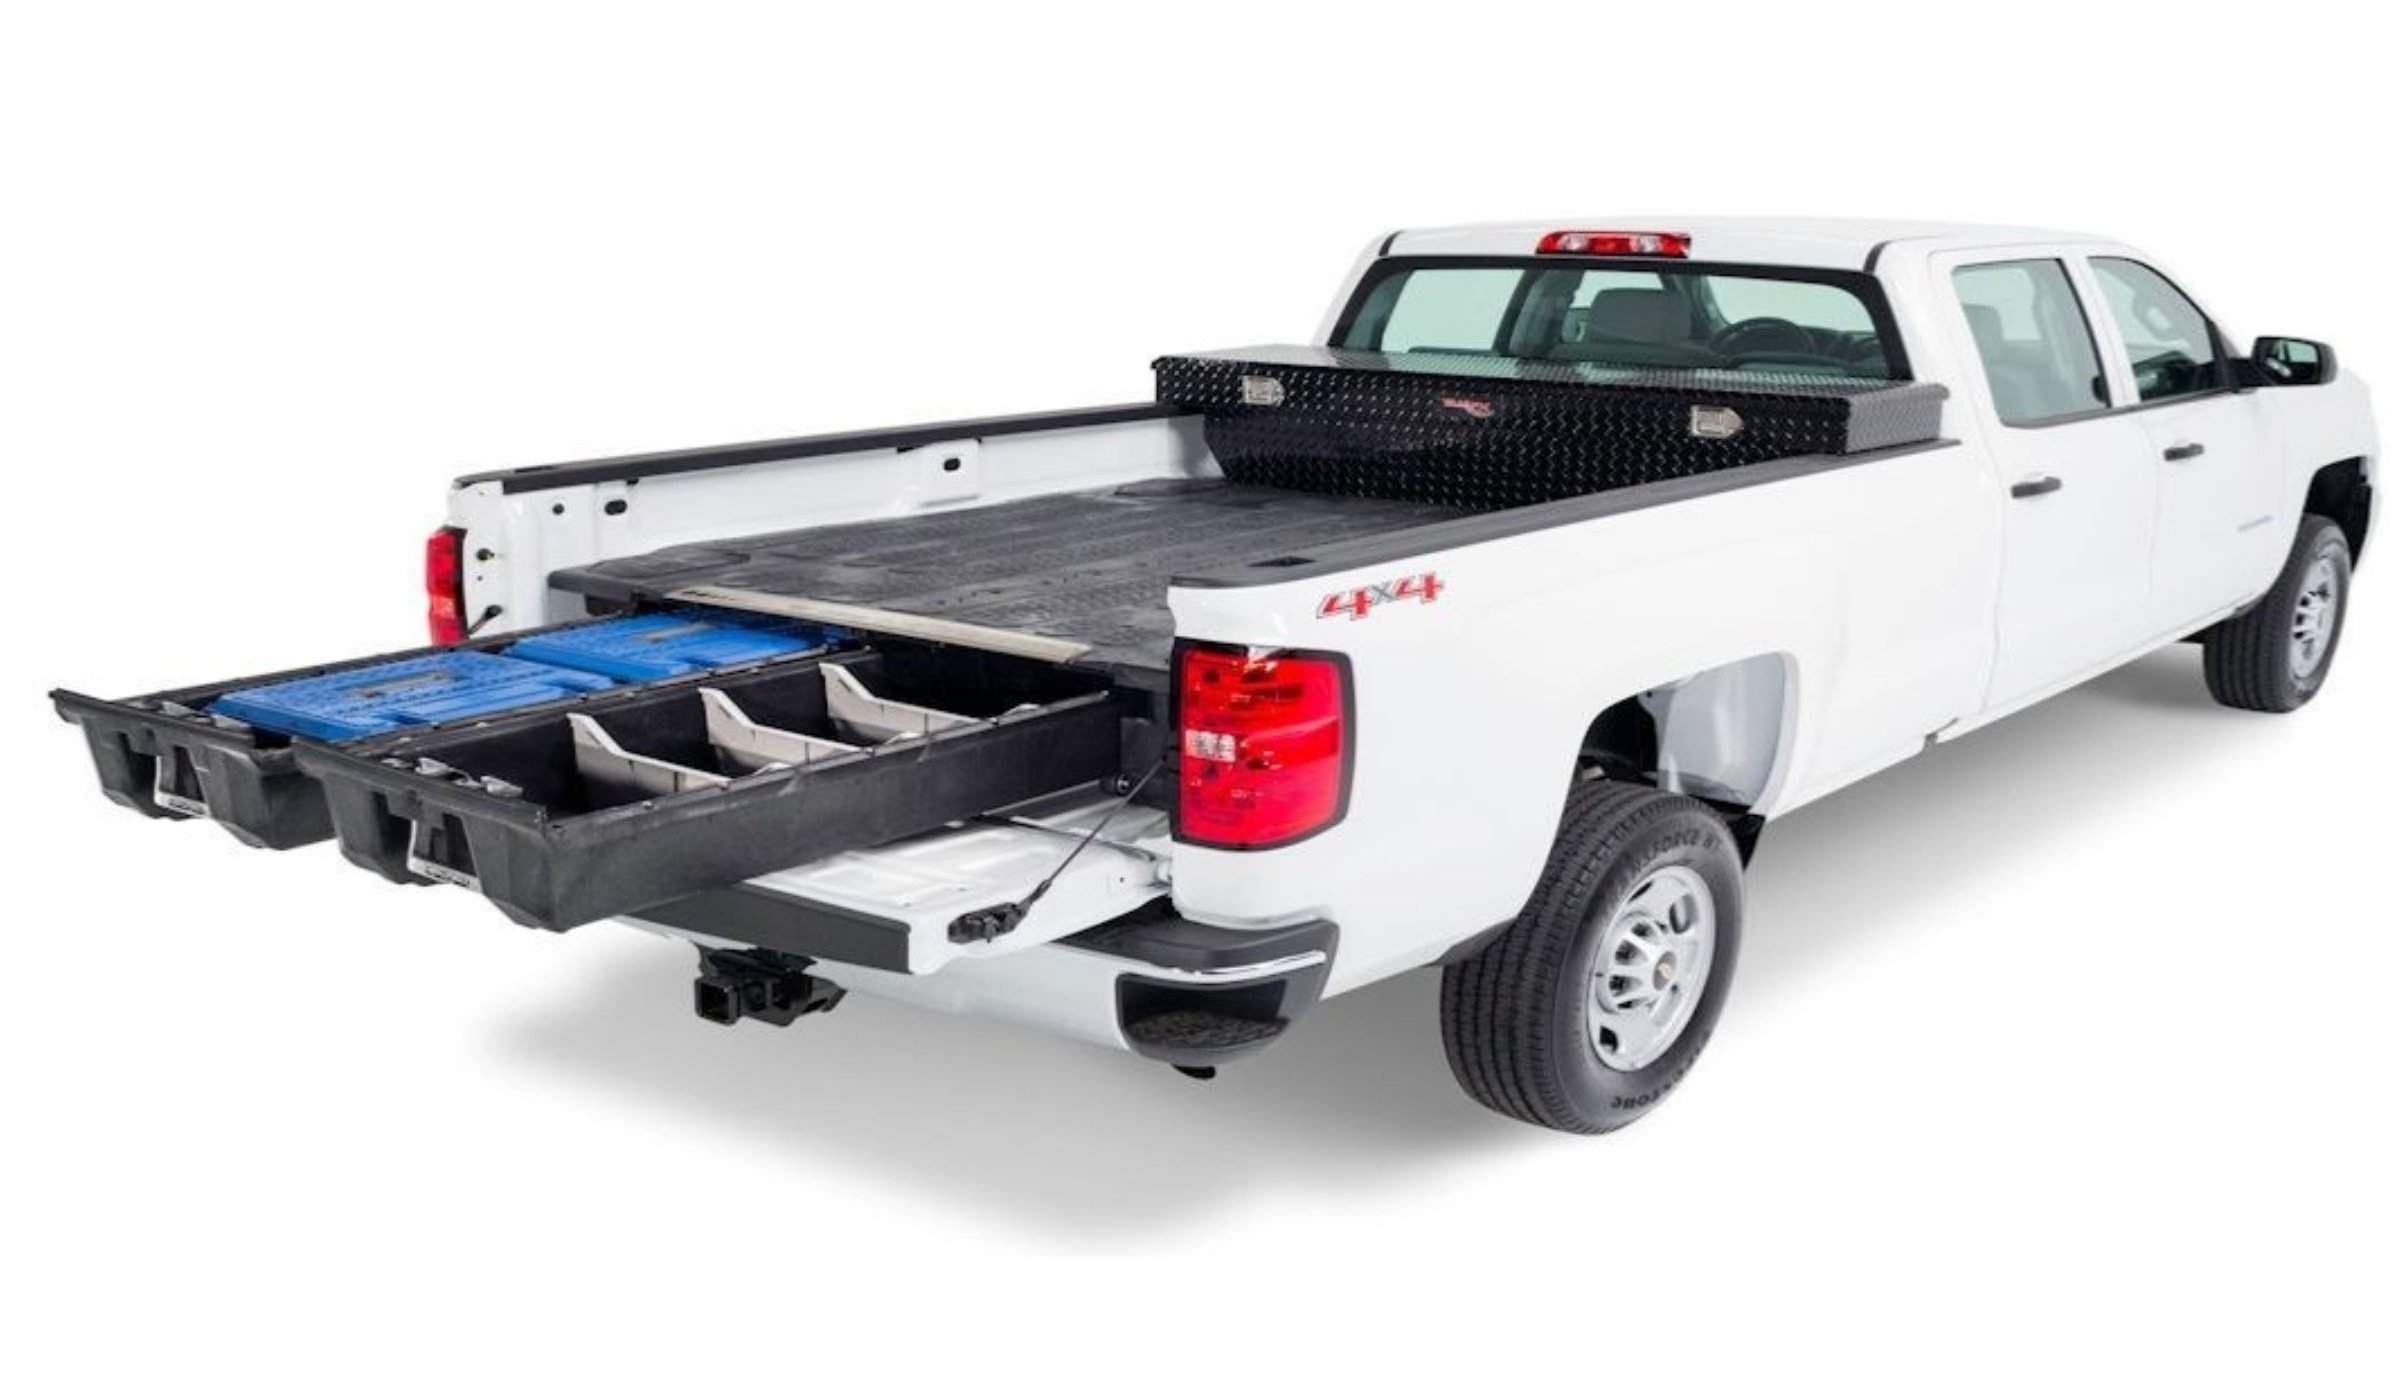 Pickup truck with custom bed for storage